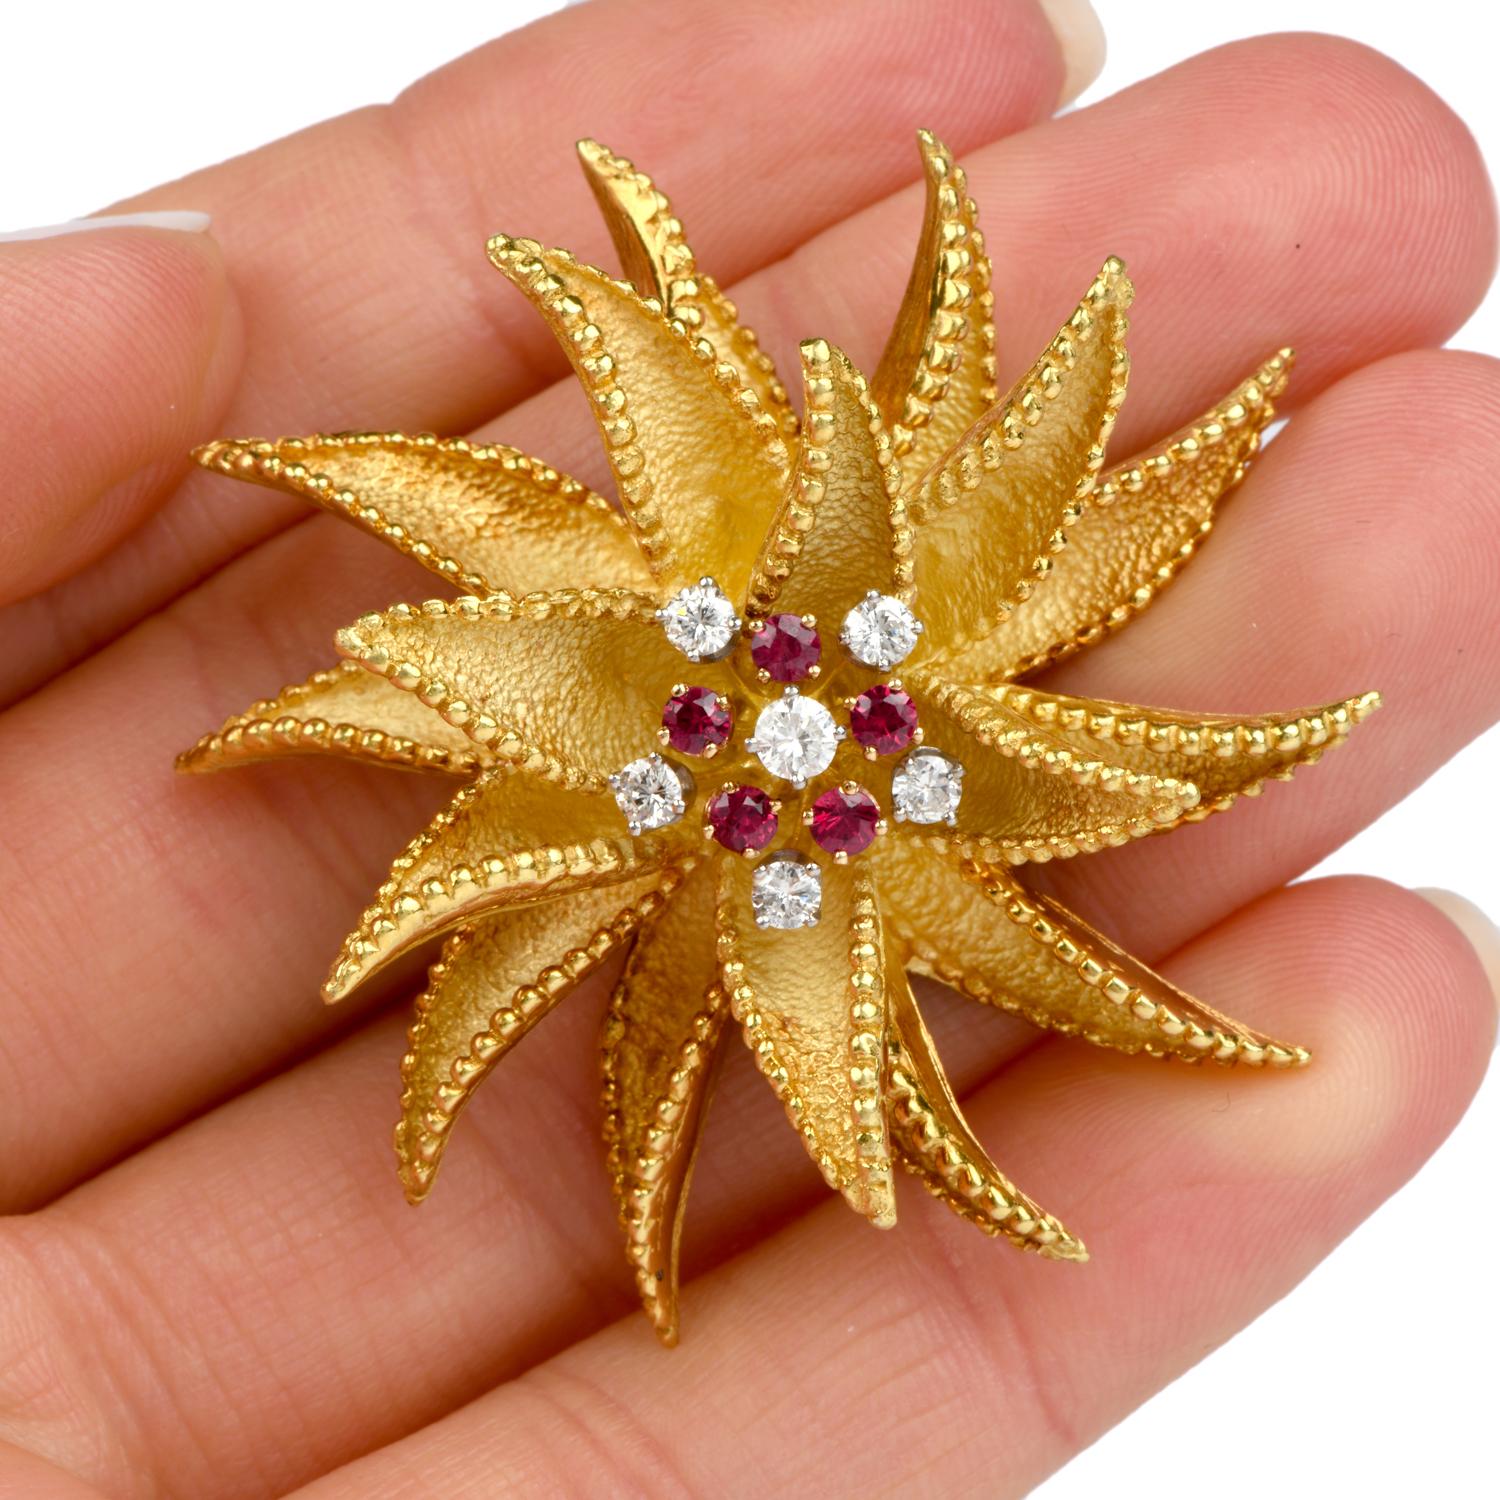 This remarkably created vintage brooch pin was inspired in a 
floral pinwheel motif and crafted in 18K gold.
Each petal is meticulously detailed with a fine cut beading 
pattern around the edges and a sandblasted look through the center.
Adorning